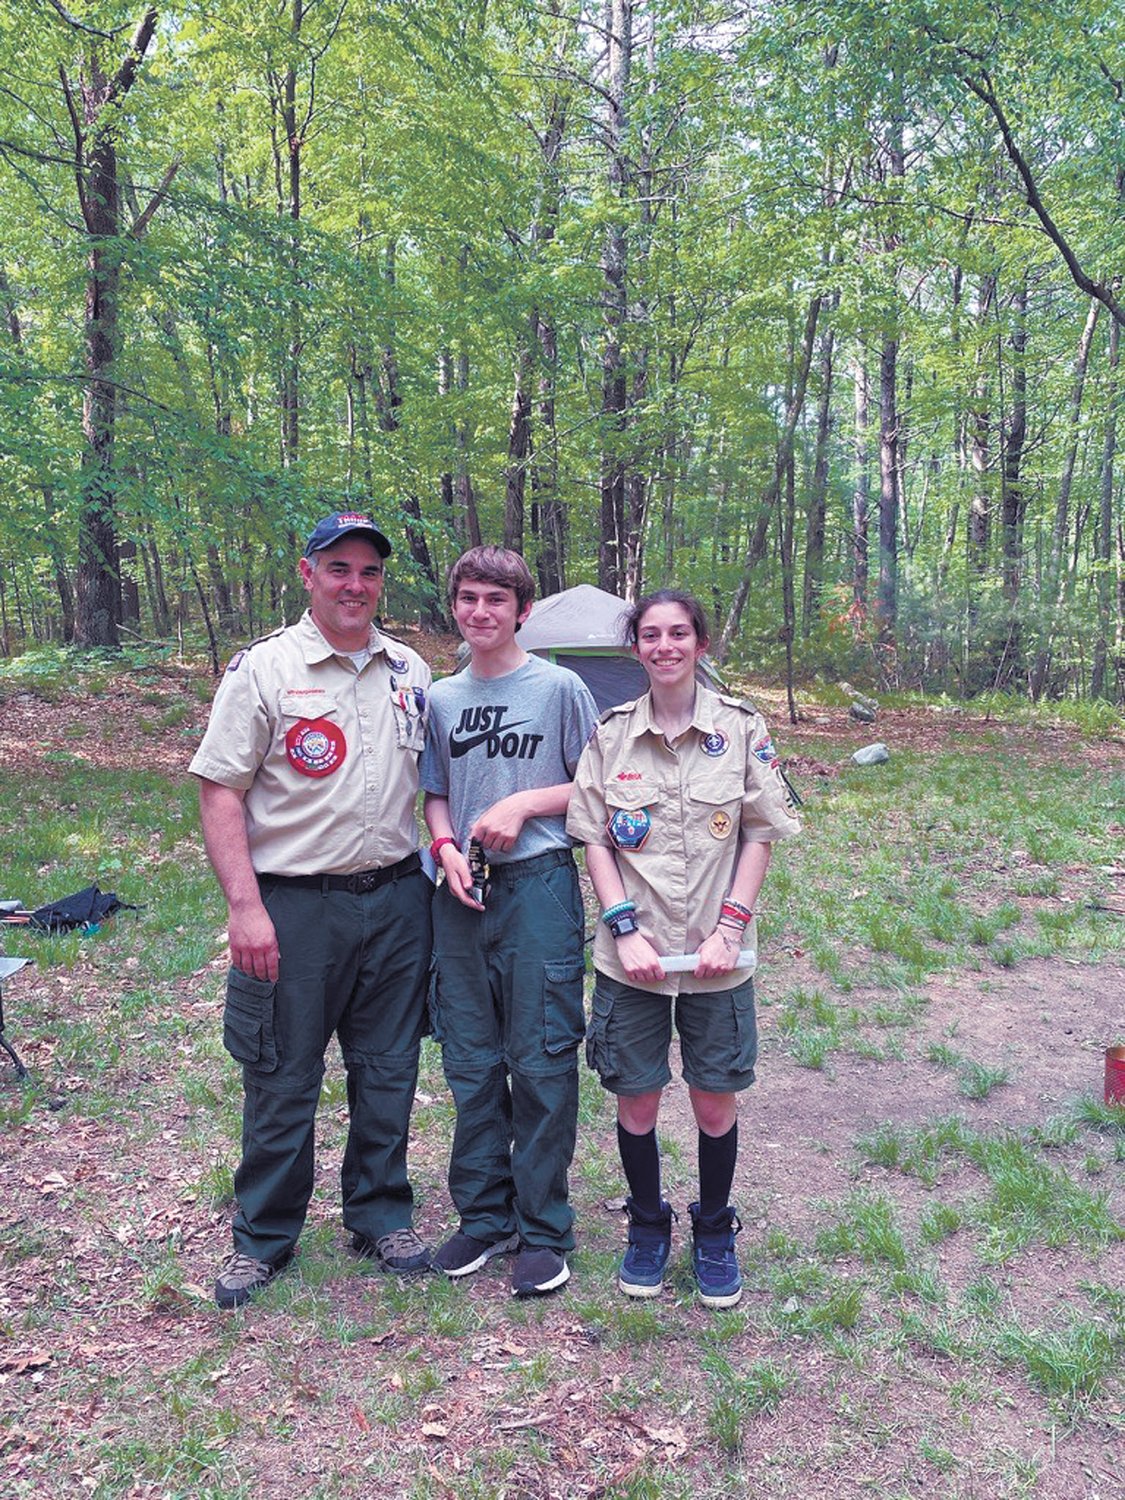 Soon to be Eagle Scout Emma Capirchio pictured with her dad Tom Capirchio and brother Derek.